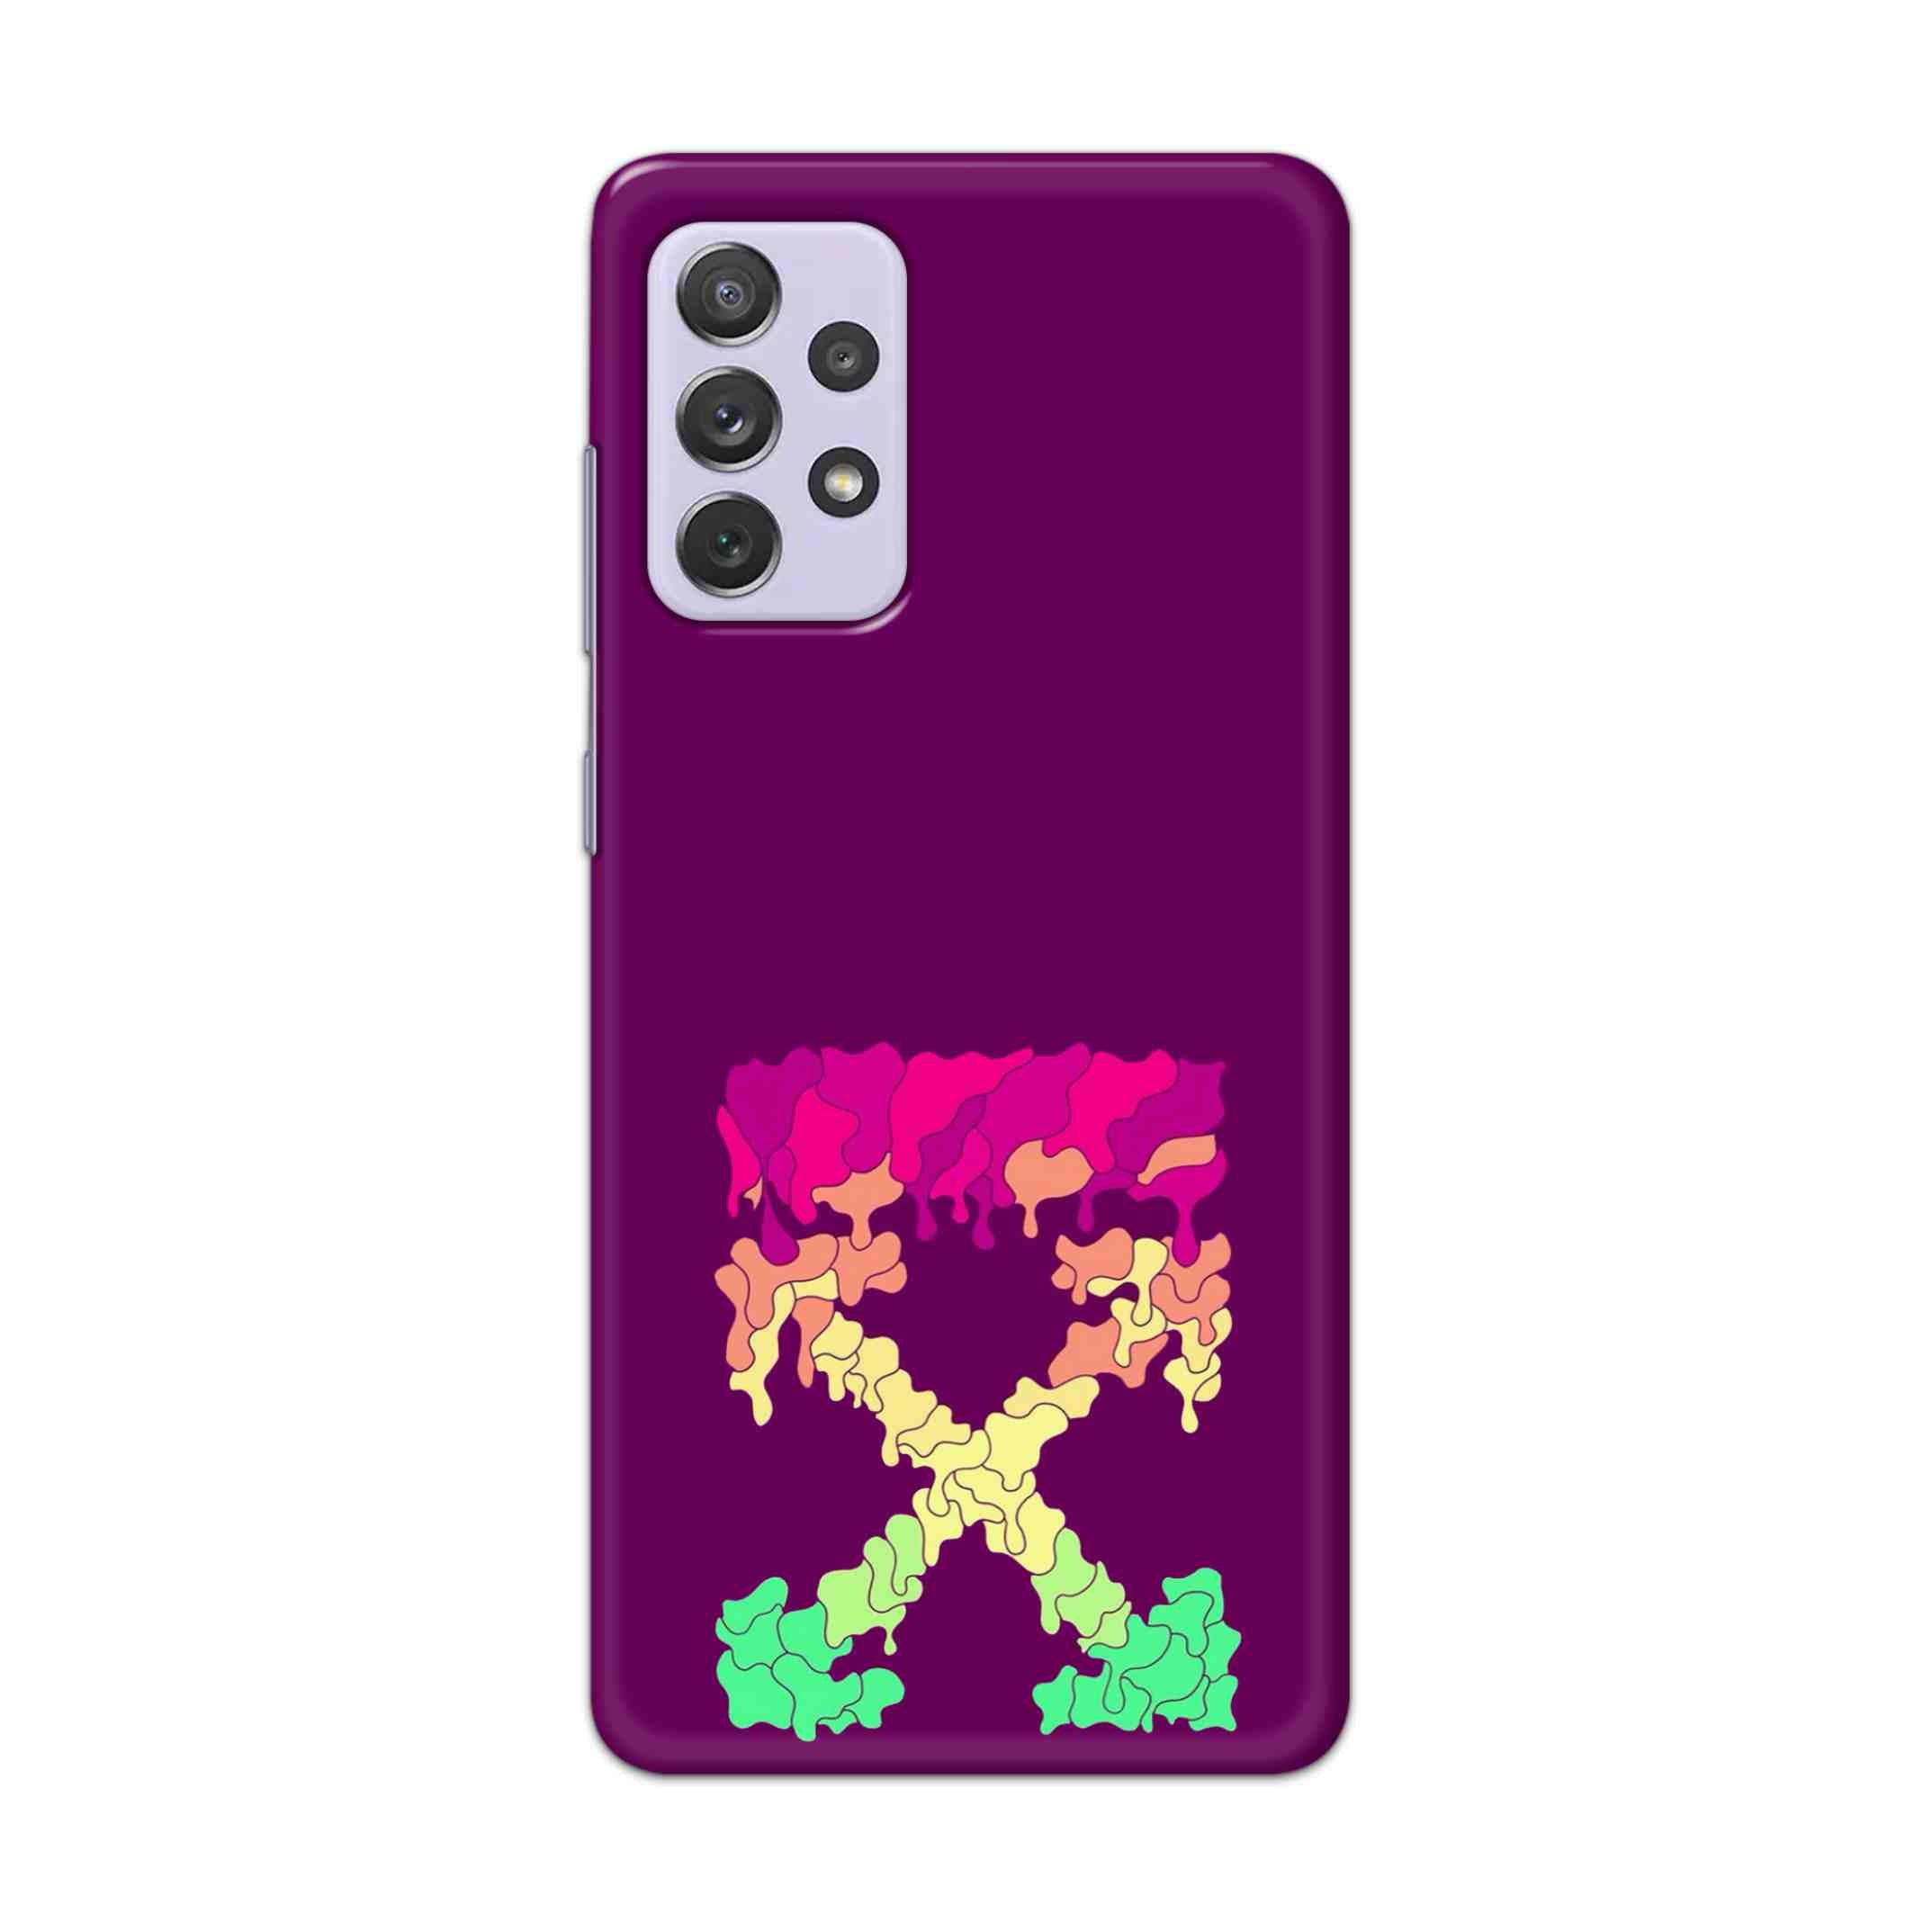 Buy X.O Hard Back Mobile Phone Case Cover For Samsung Galaxy A72 Online